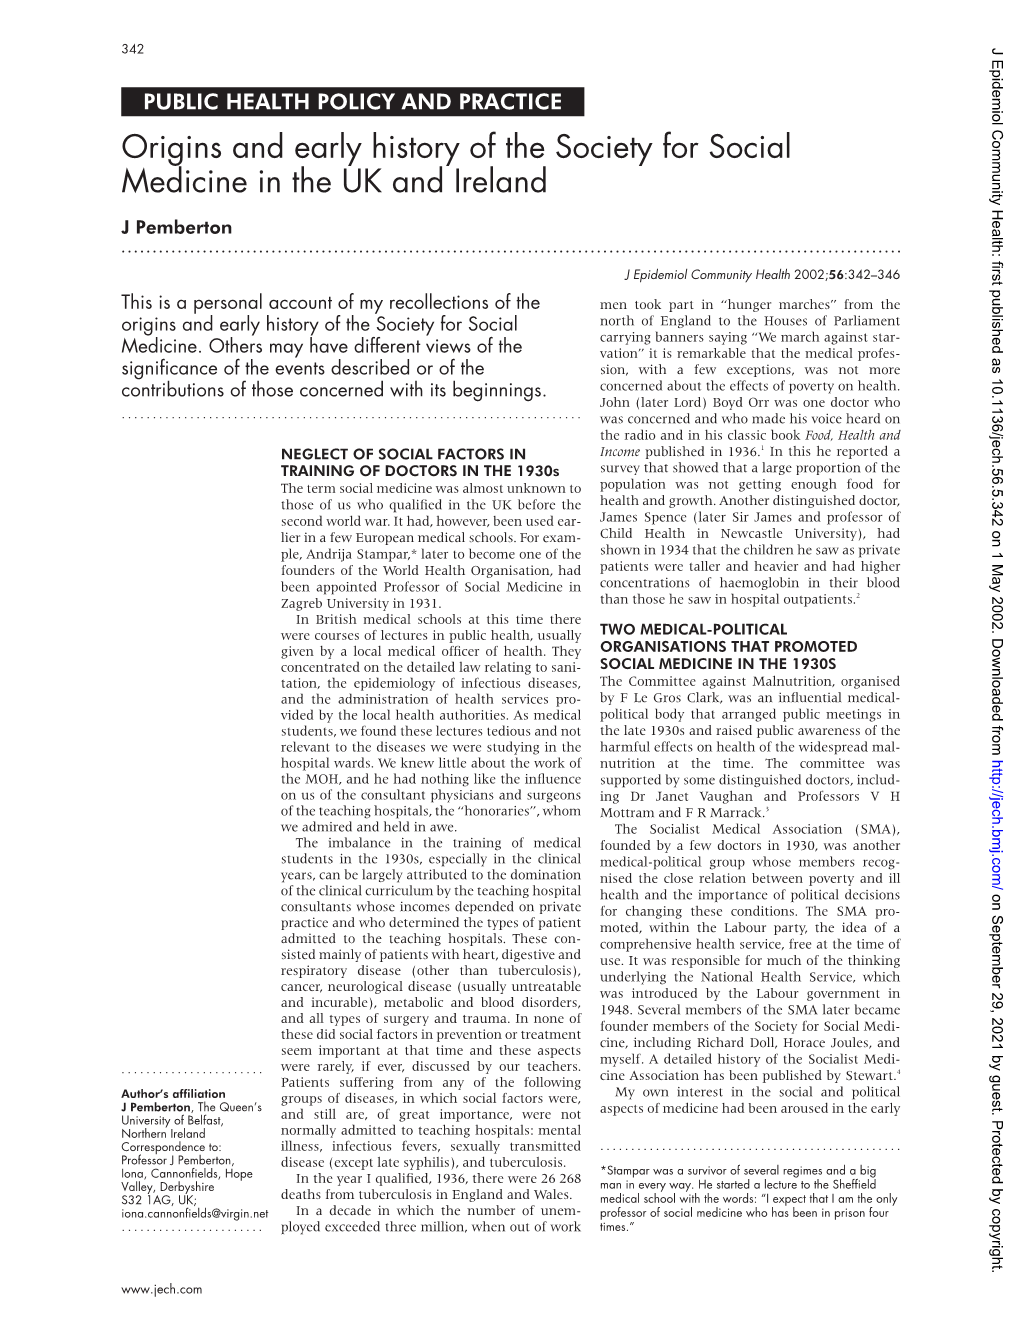 Origins and Early History of the Society for Social Medicine in the UK and Ireland J Pemberton